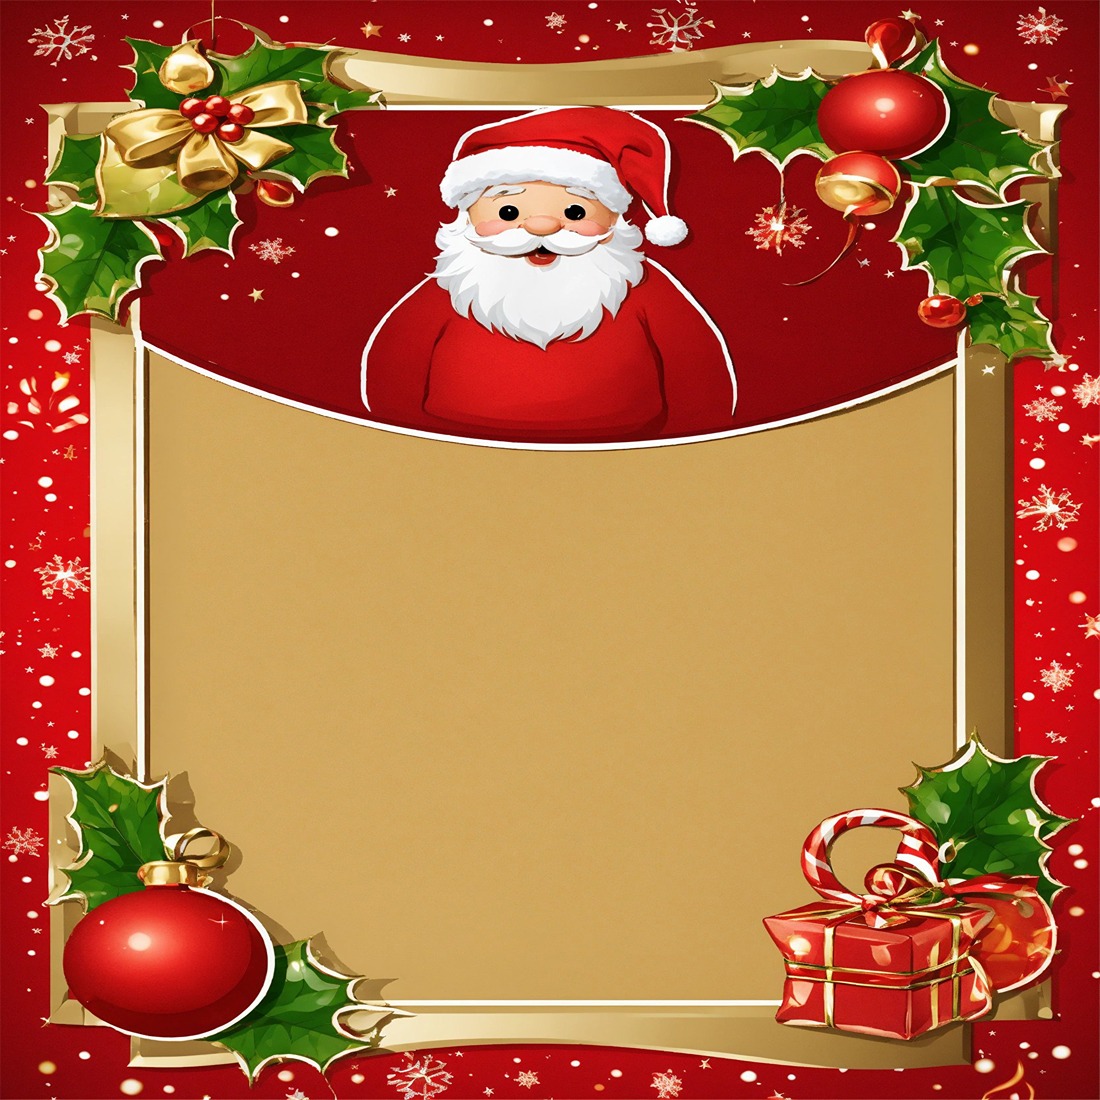 Merry Christmas - Background Invitation Card Design Template Total = 08 preview image.